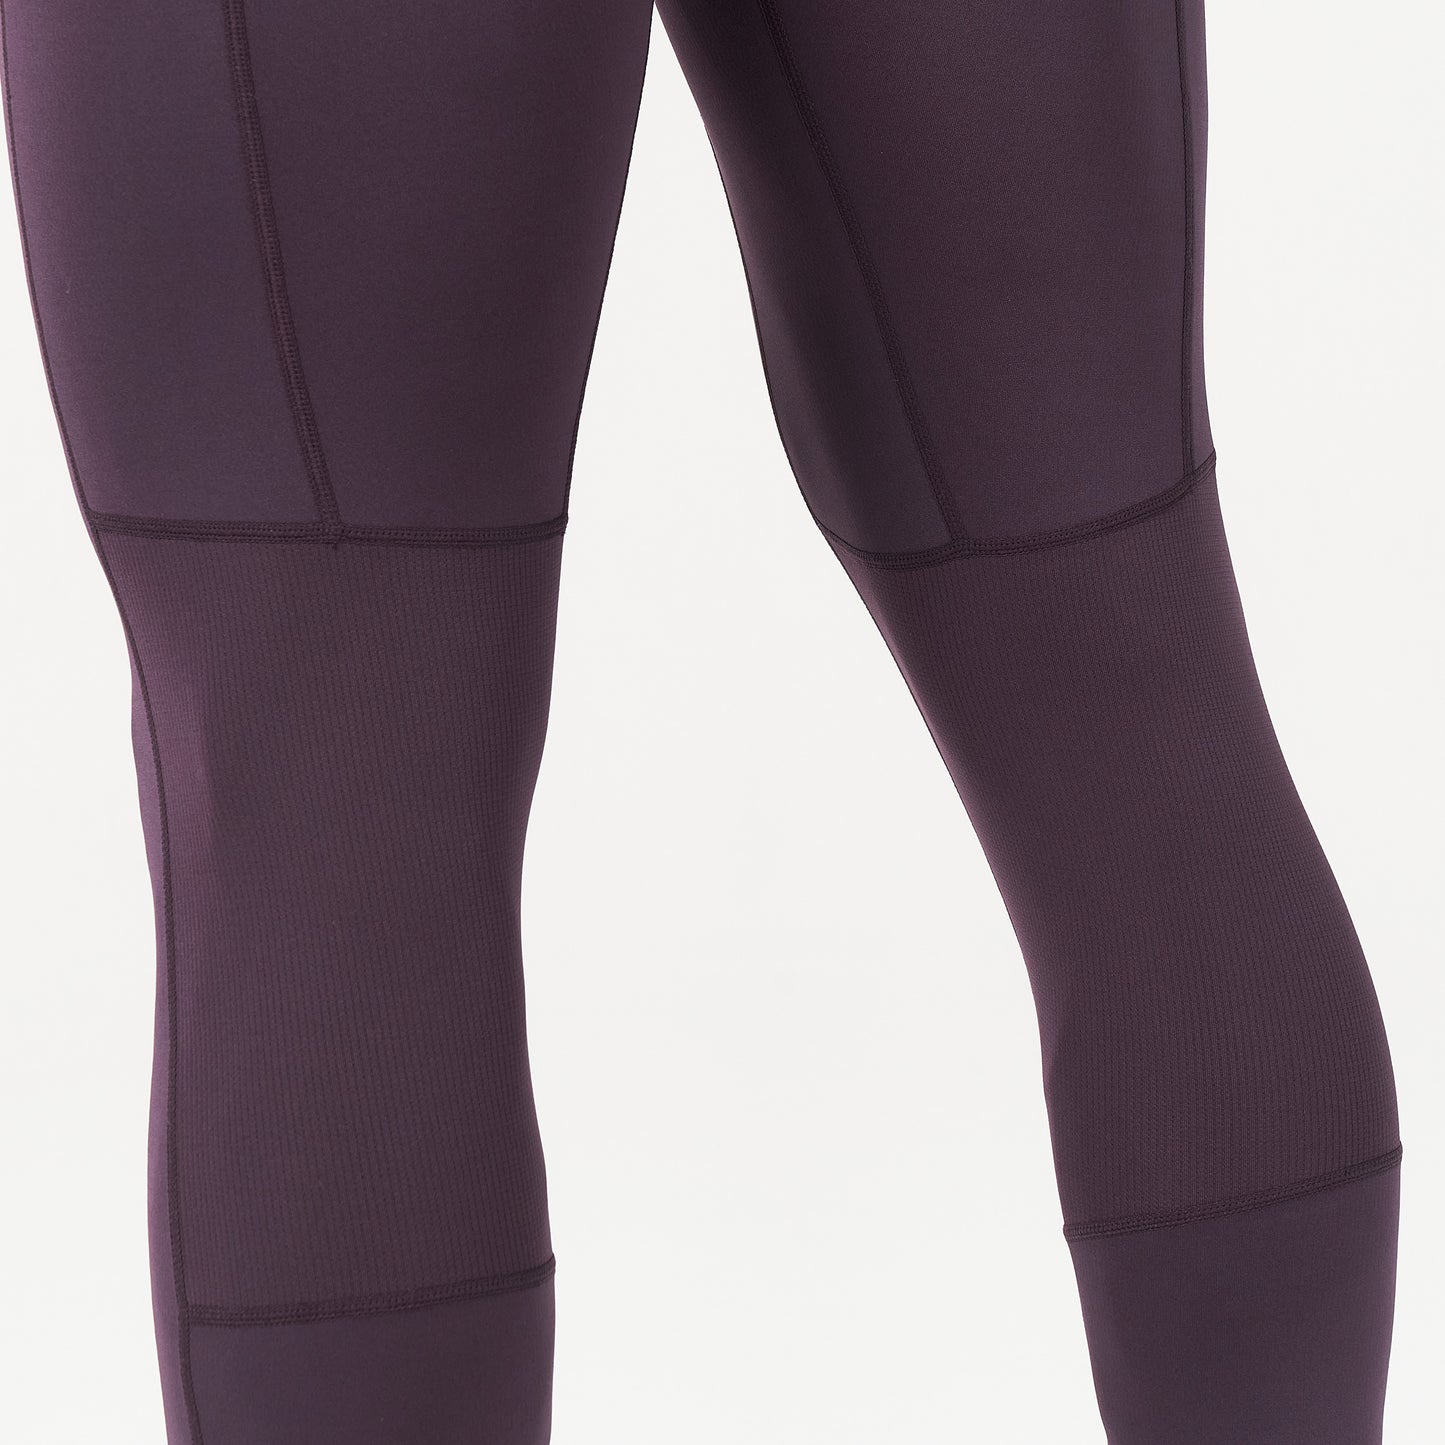 squatwolf-gym-wear-lab360-tdry-gym-tights-plum-perfect-workout-tights-for-men